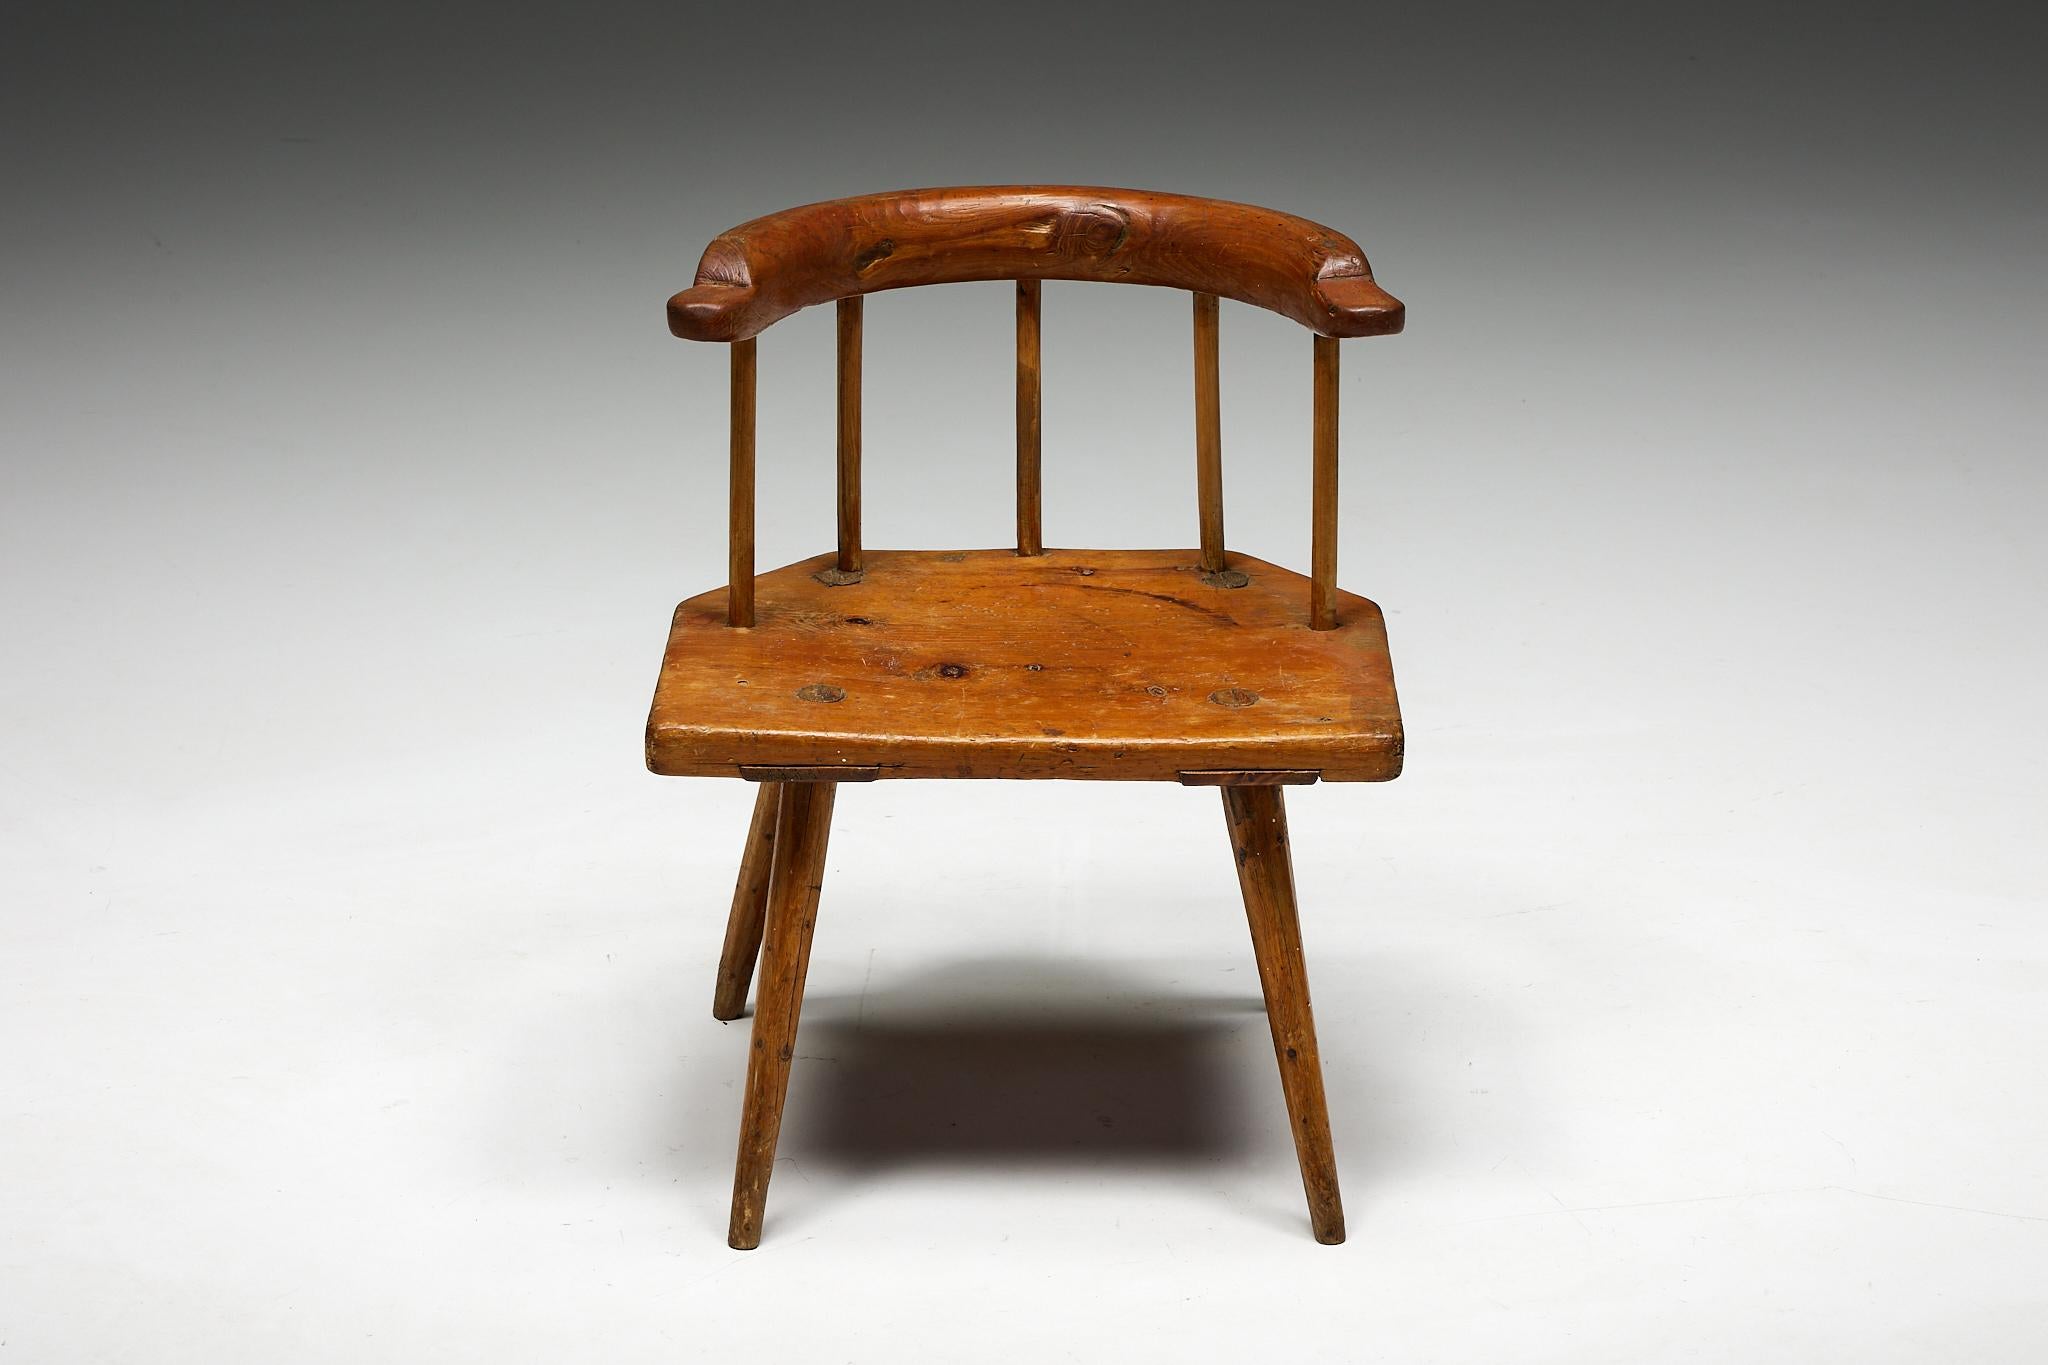 Tyrol; Tyrolean Chair; Famer's Chair; 19th Century; Stool; Escabelle; Solid Wood; 1800s; Austria; Low Armchair;

Tyrolean folk art low armchair, a stunning embodiment of late 19th-century craftsmanship that exudes timeless charm and rustic